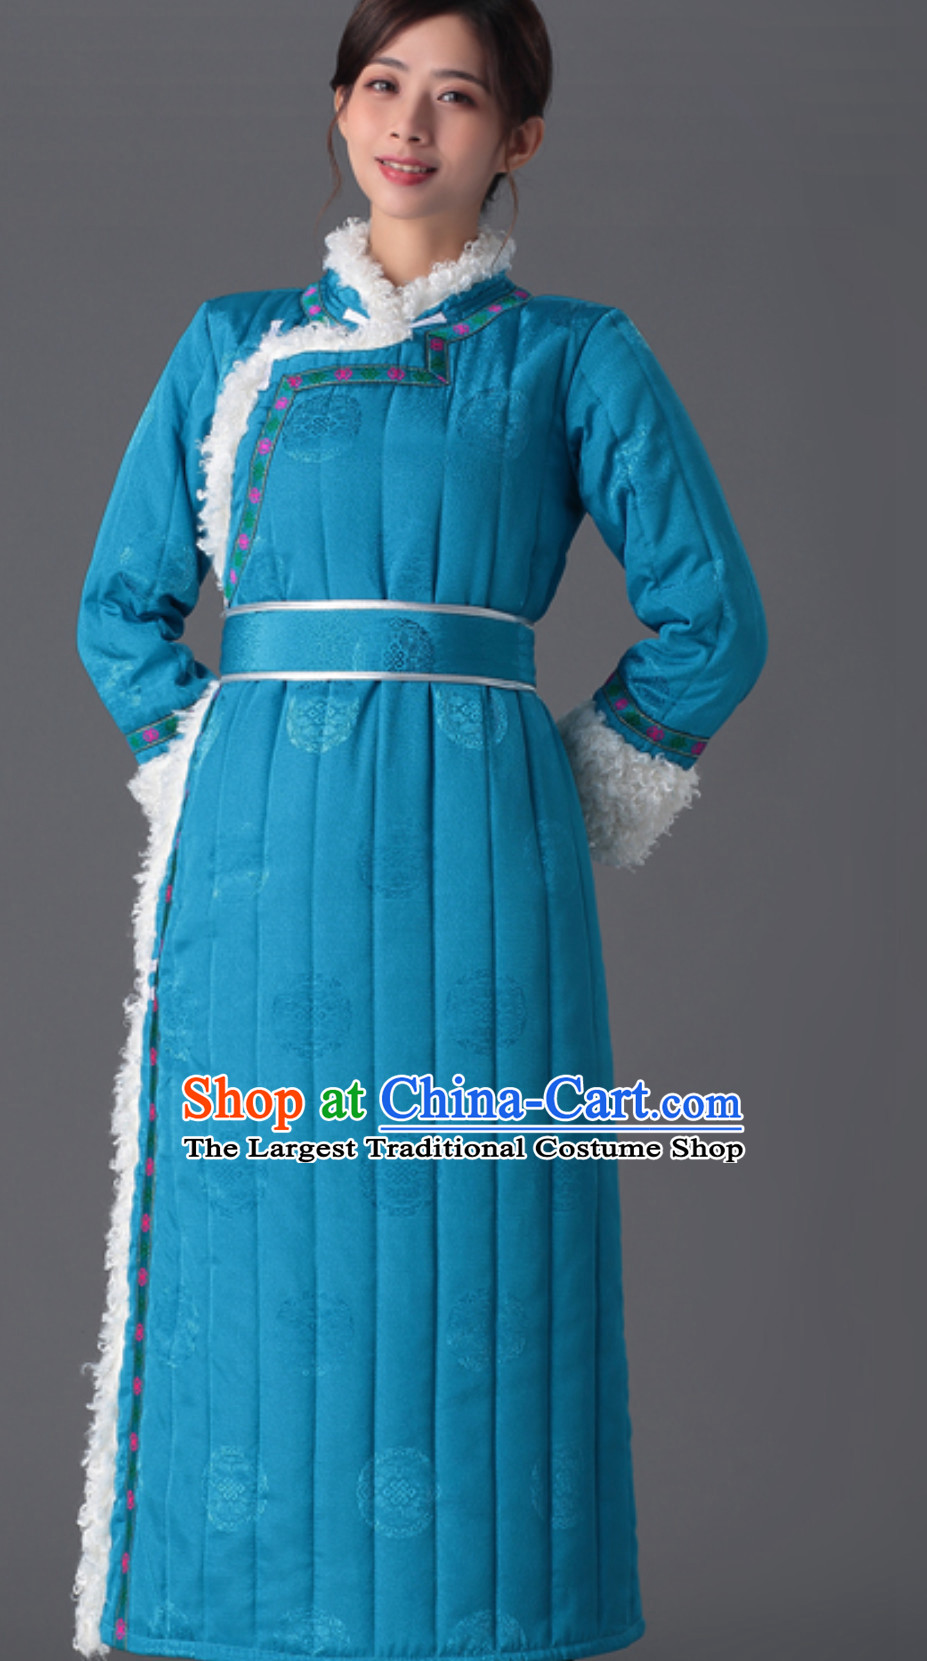 Top Chinese Traditional Mongol Minority Ethnic Costume Blue Fabric Mongolian Dresses for Women